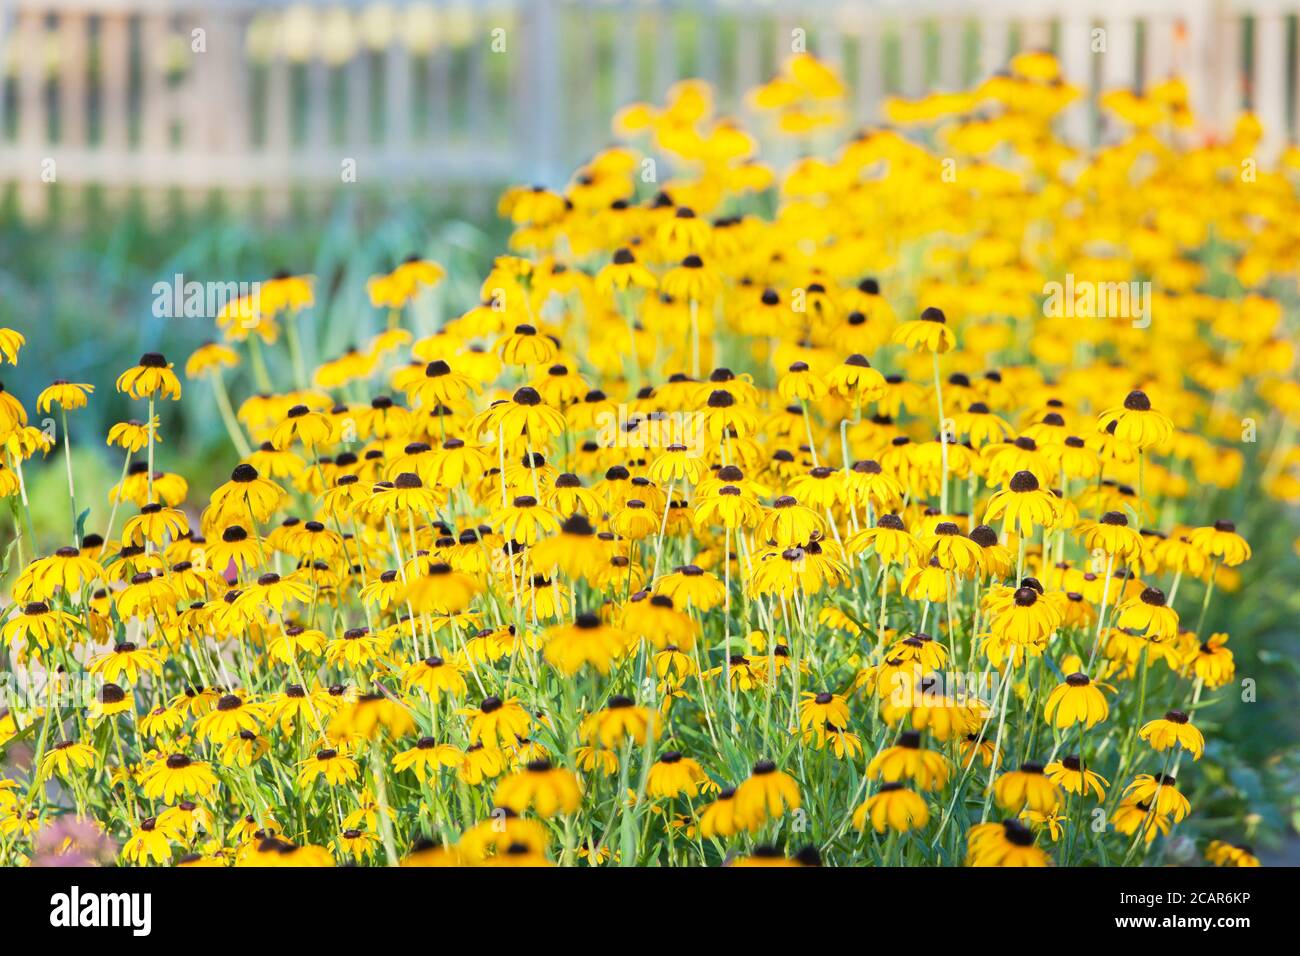 Yellow flowers, rudbeckia, in a flowerbed with blurred fence in the background - selective focus Stock Photo